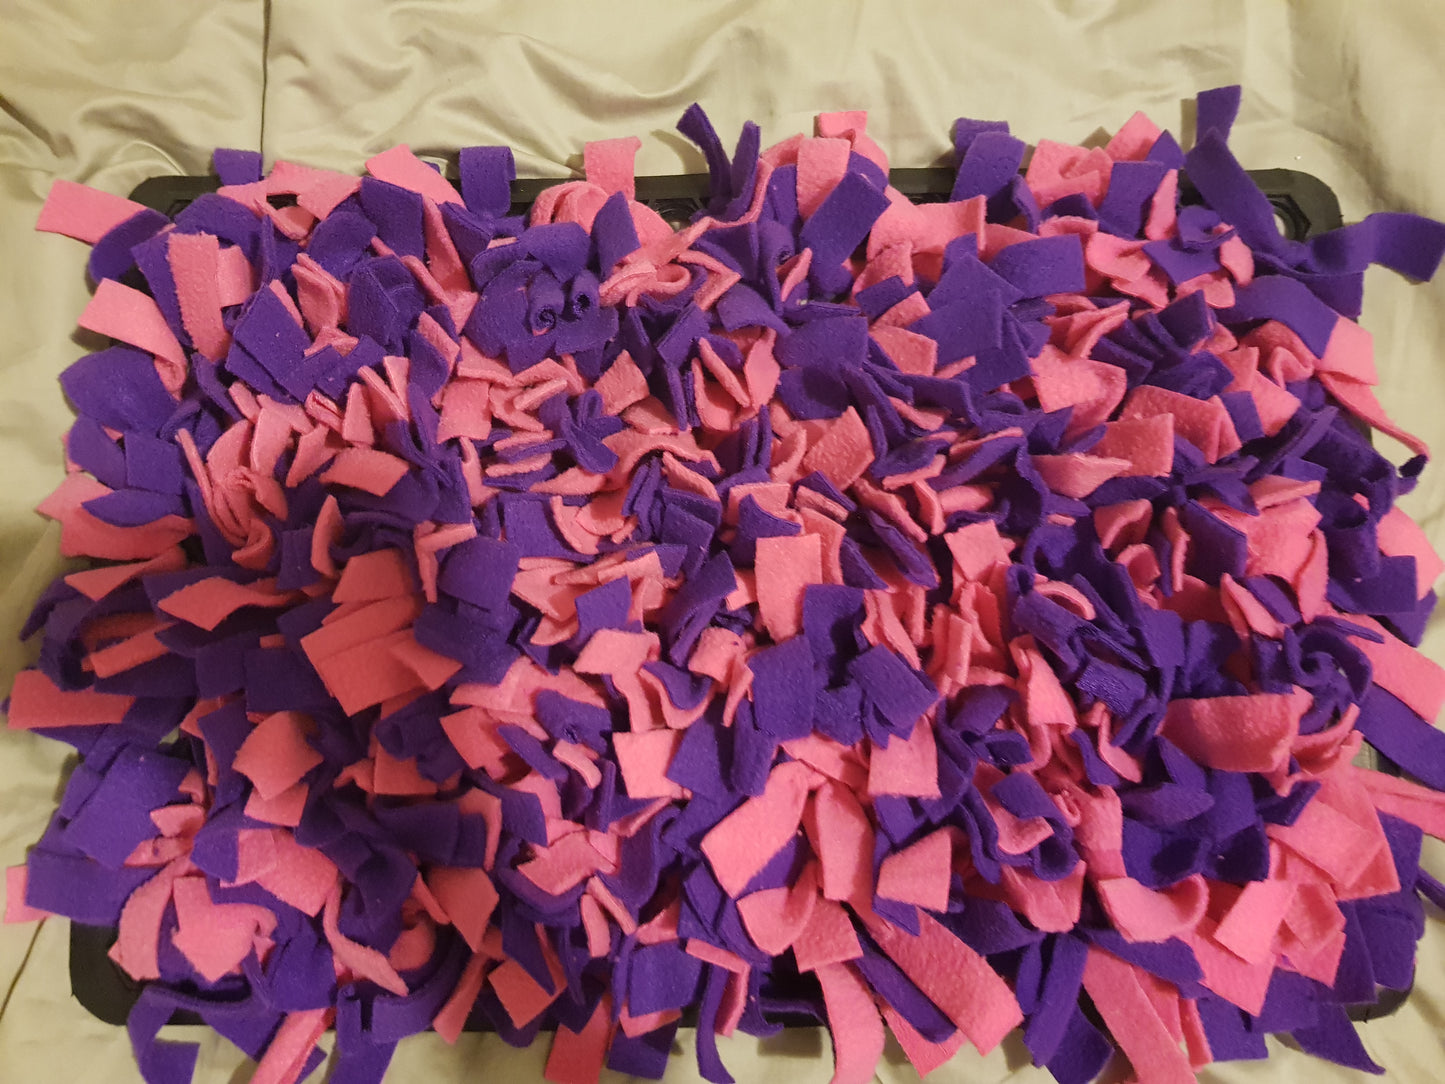 Snuffle Mat  - Large (60x40cm) - Custom Made To Order